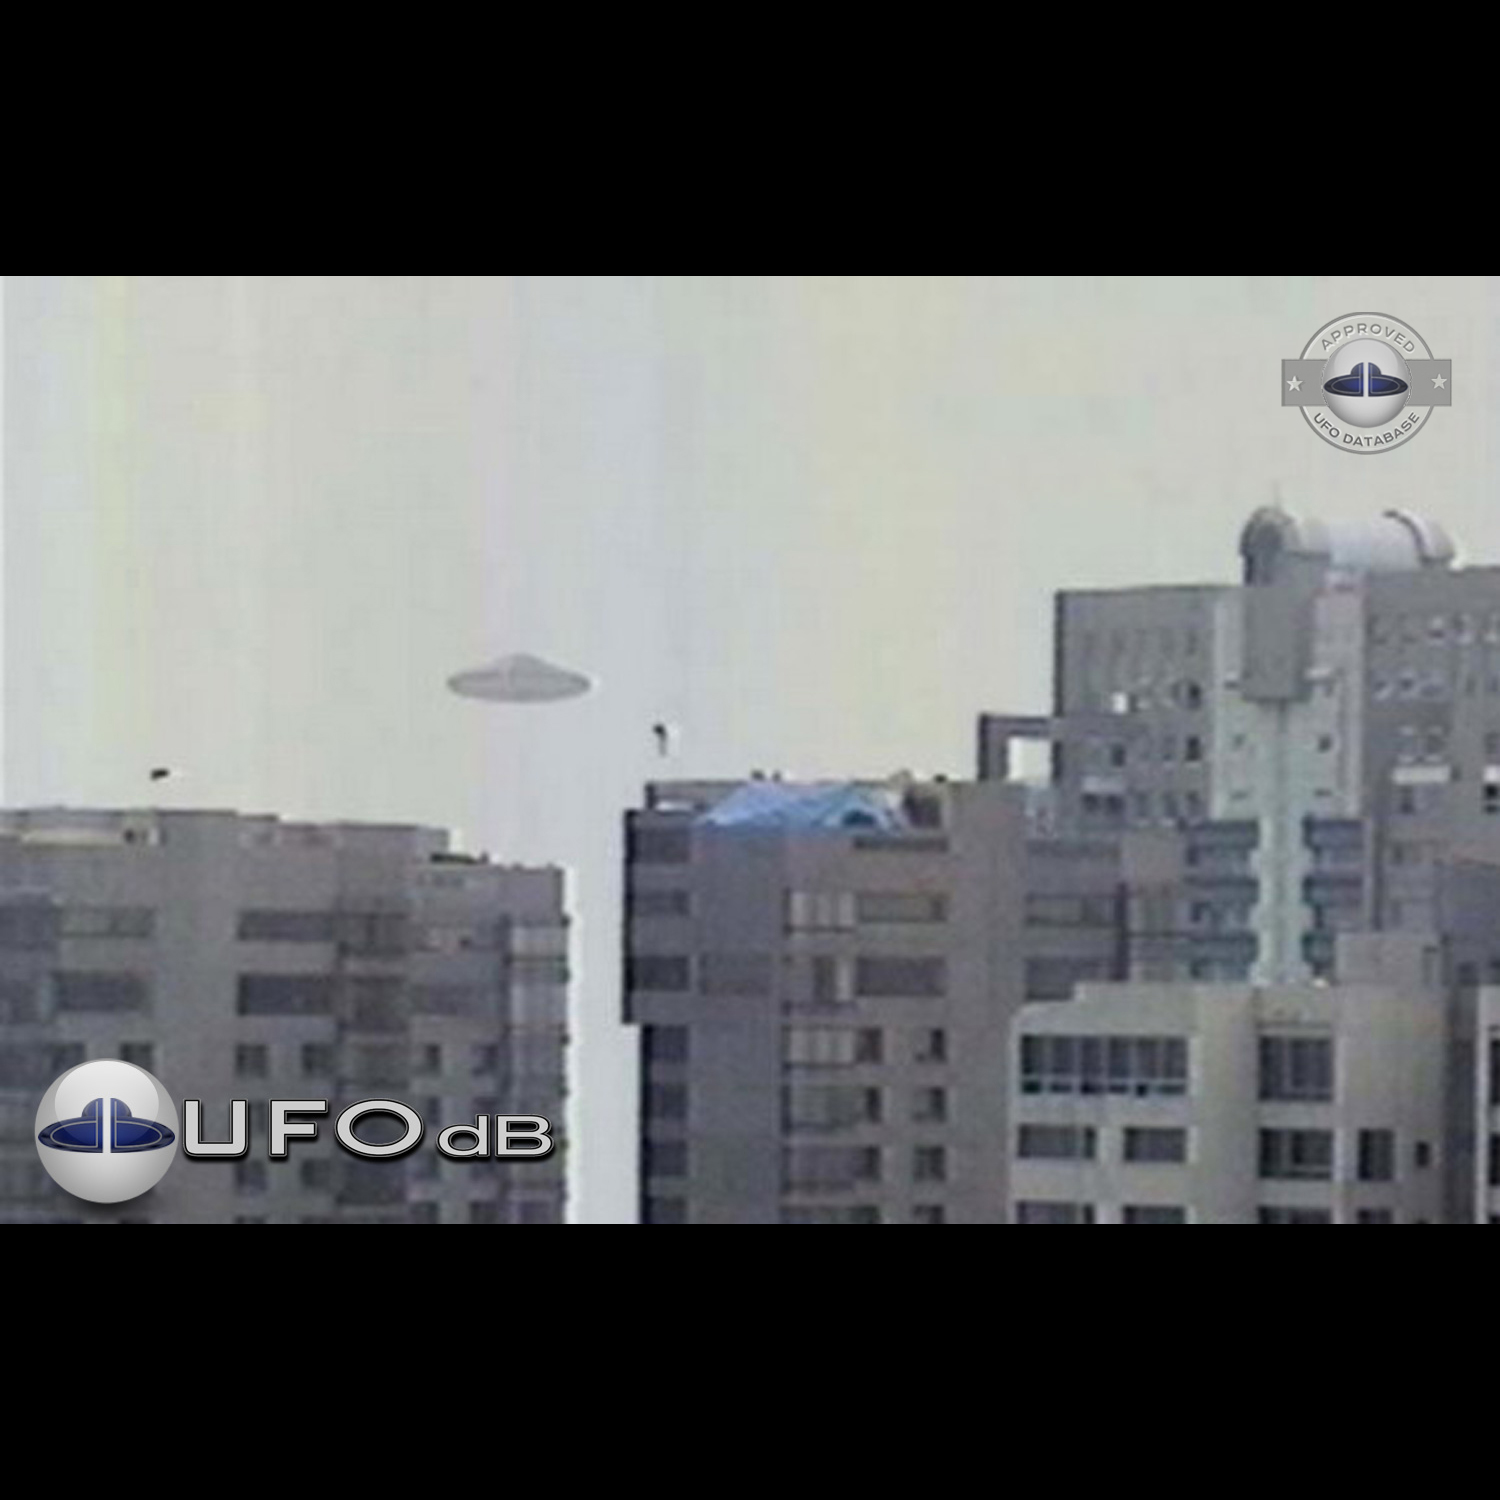 Mexico city August 6 1997 UFO Pictures from famous video (UFOdB.com) UFO Picture #55-1